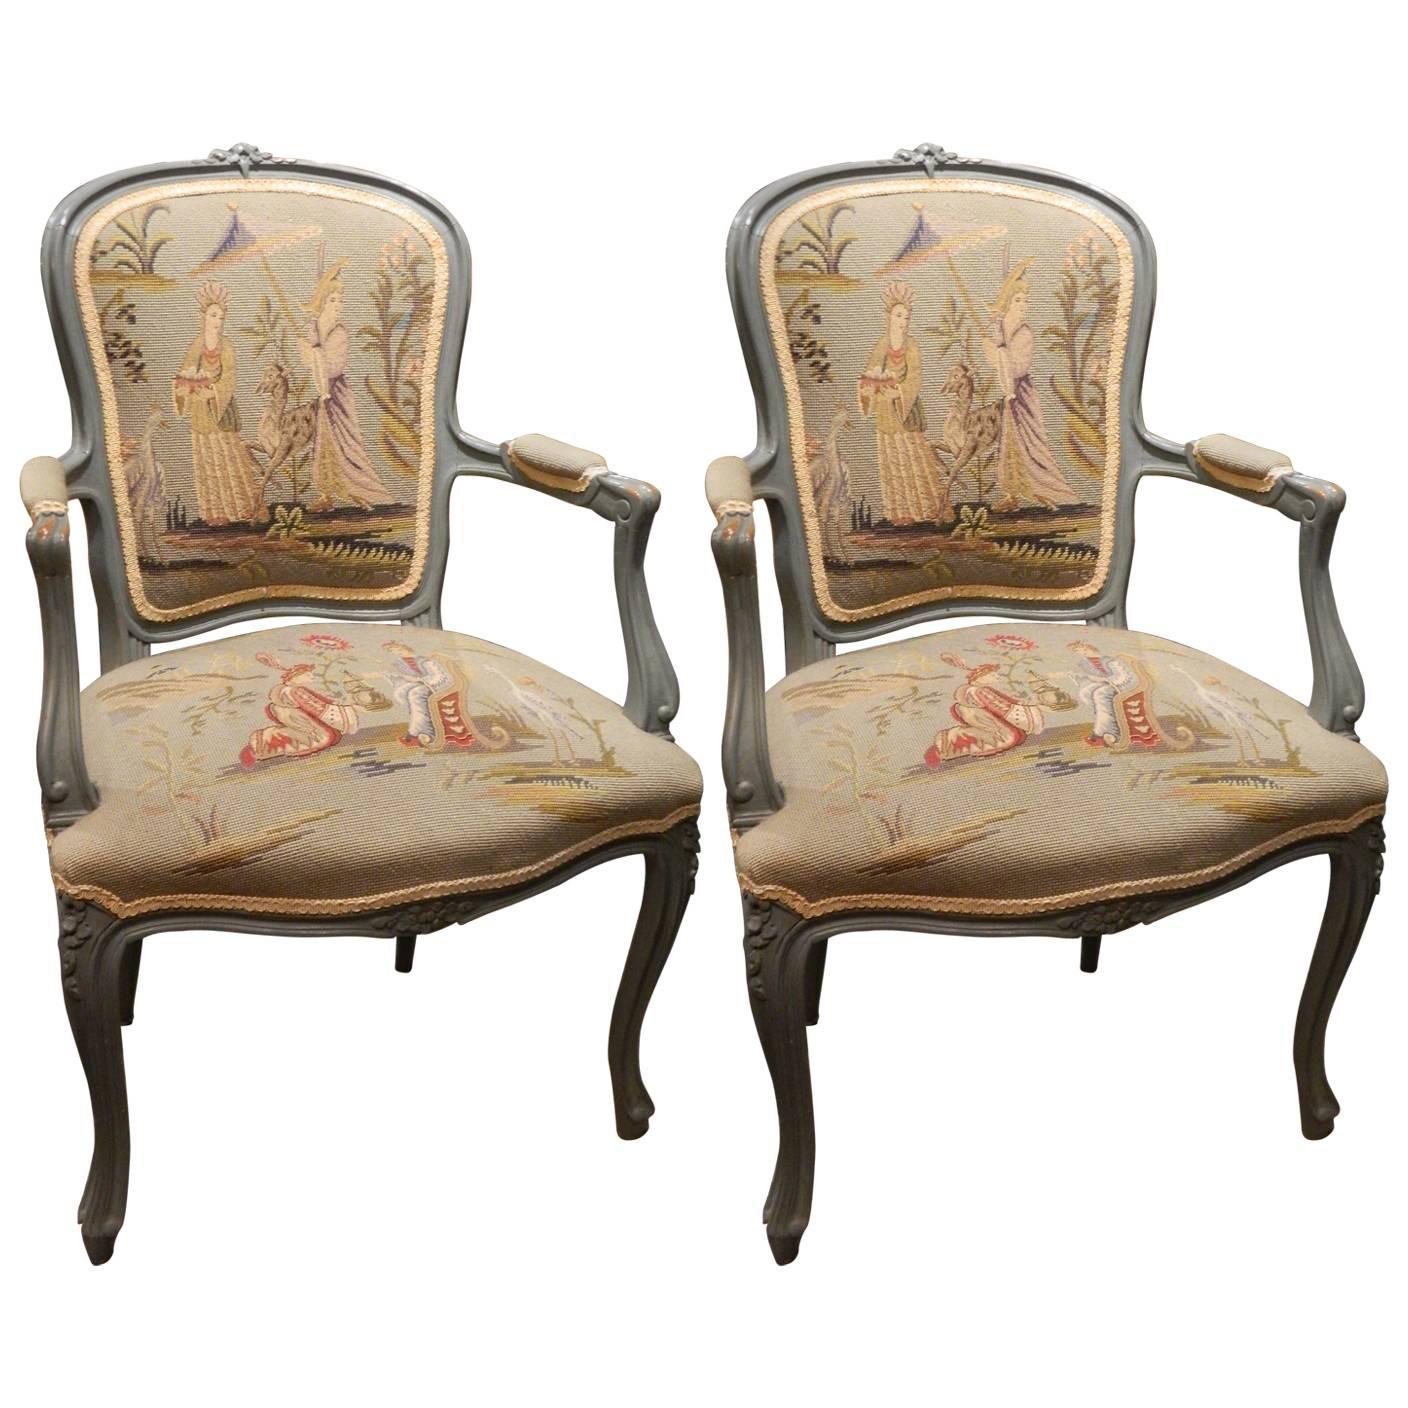 Pair of Louis XVI Style Painted Chairs with Needlepoint Tapestry, 20th Century